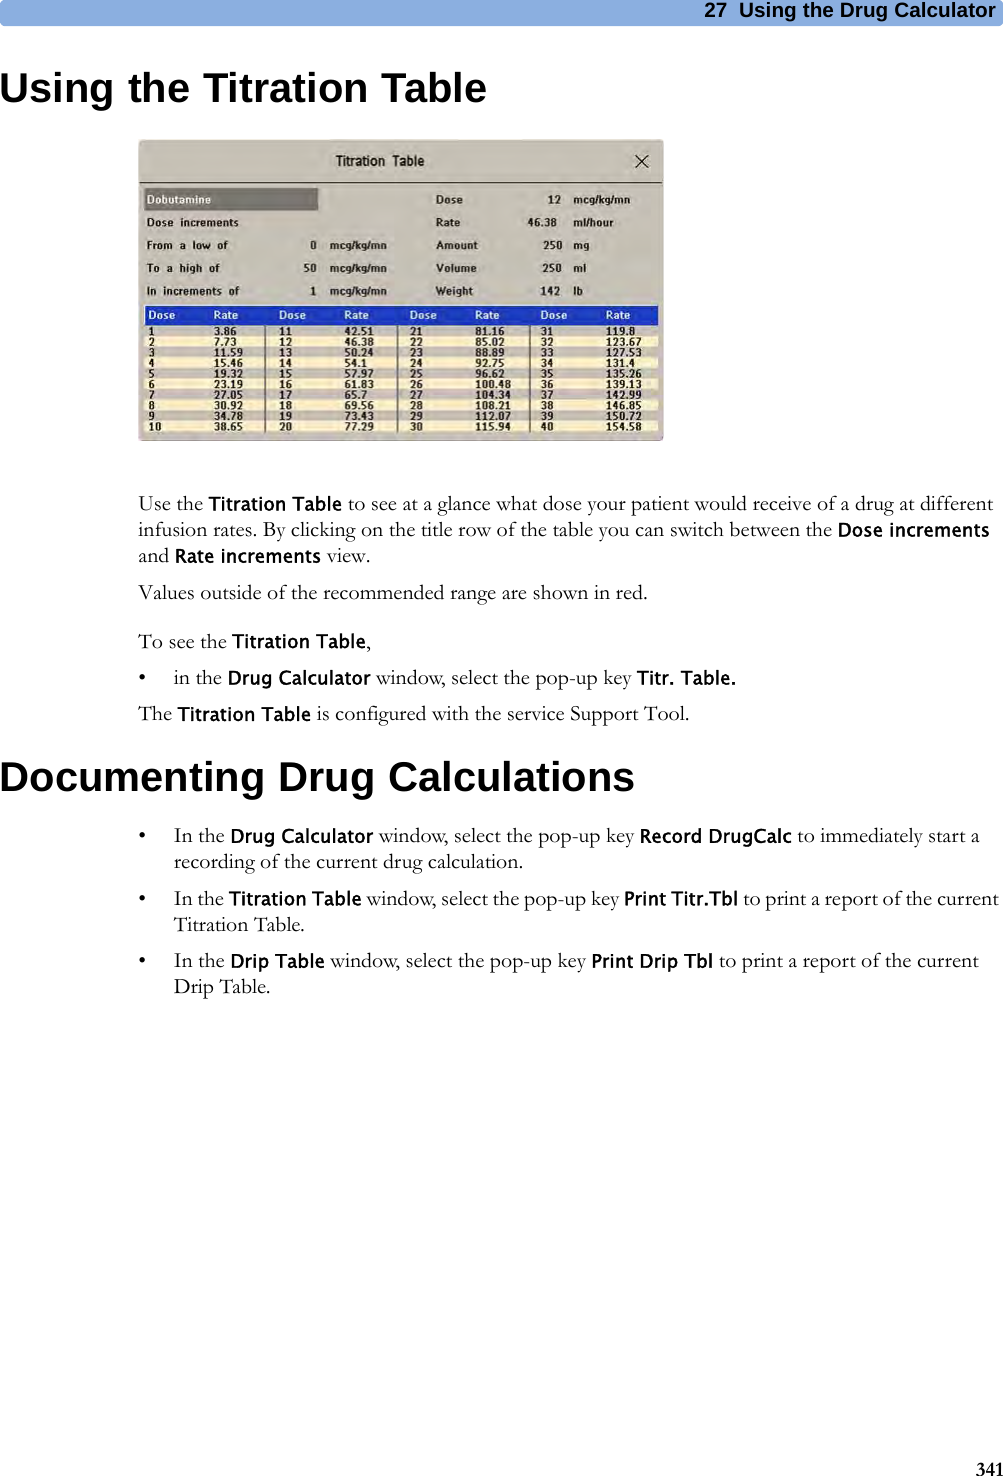 27 Using the Drug Calculator341Using the Titration TableUse the Titration Table to see at a glance what dose your patient would receive of a drug at different infusion rates. By clicking on the title row of the table you can switch between the Dose increments and Rate increments view.Values outside of the recommended range are shown in red.To see the Titration Table,•in the Drug Calculator window, select the pop-up key Titr. Table.The Titration Table is configured with the service Support Tool.Documenting Drug Calculations•In the Drug Calculator window, select the pop-up key Record DrugCalc to immediately start a recording of the current drug calculation.•In the Titration Table window, select the pop-up key Print Titr.Tbl to print a report of the current Titration Table.•In the Drip Table window, select the pop-up key Print Drip Tbl to print a report of the current Drip Table.